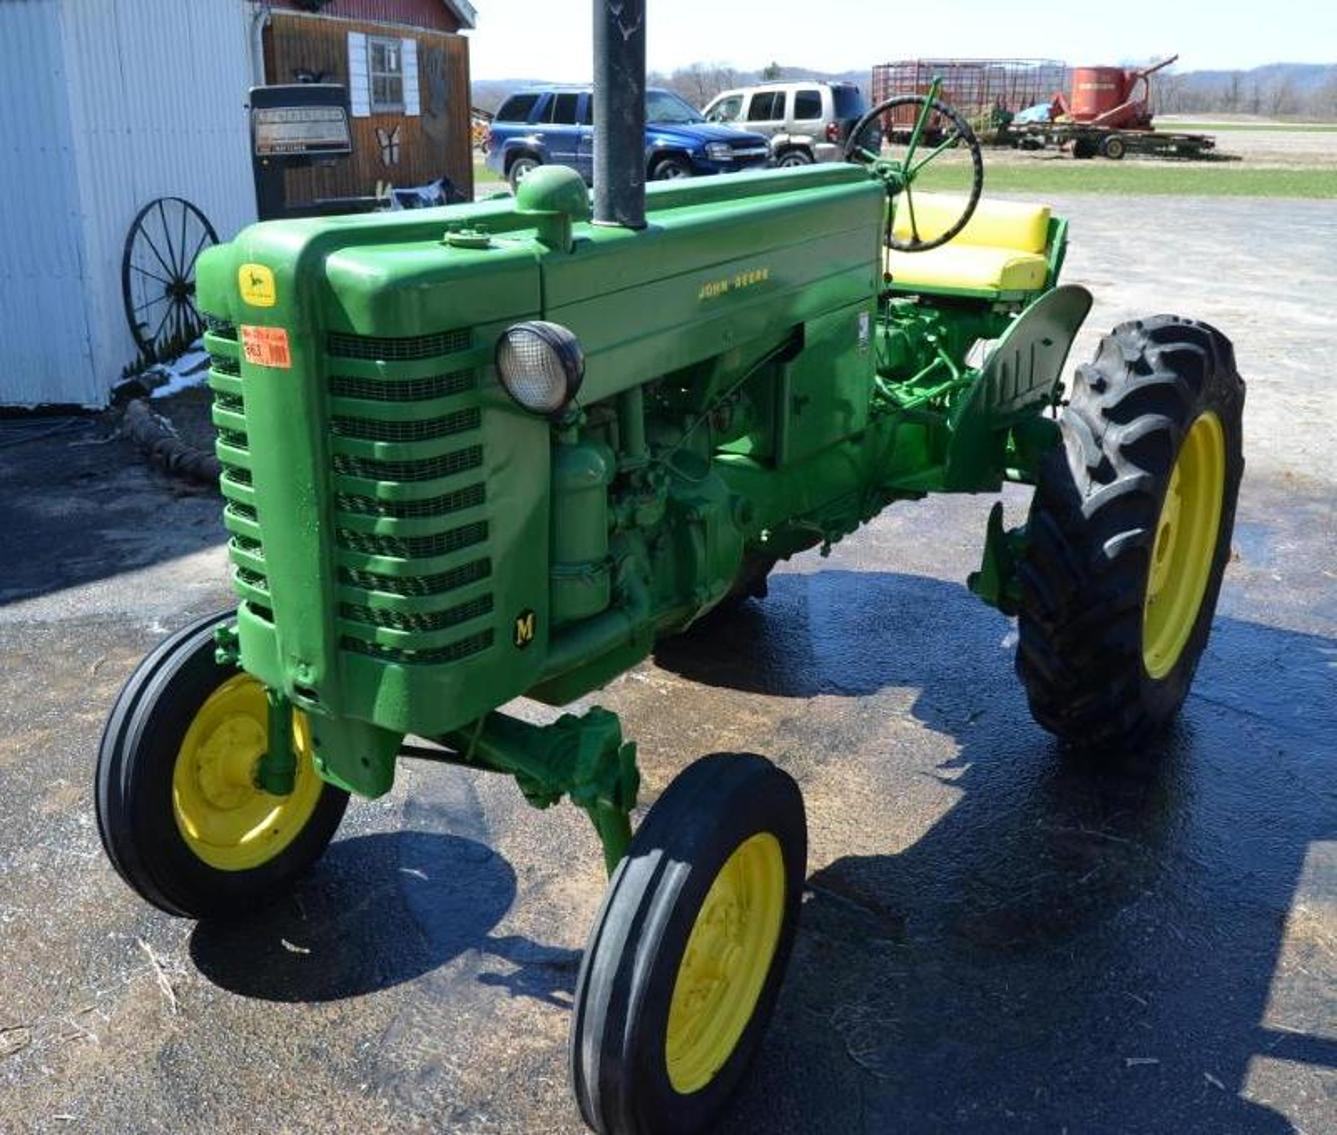 Dennis & Beverly Weiss Auction: John Deere Tractors, Machinery, Dairy Equipment, Lawn & Garden and More